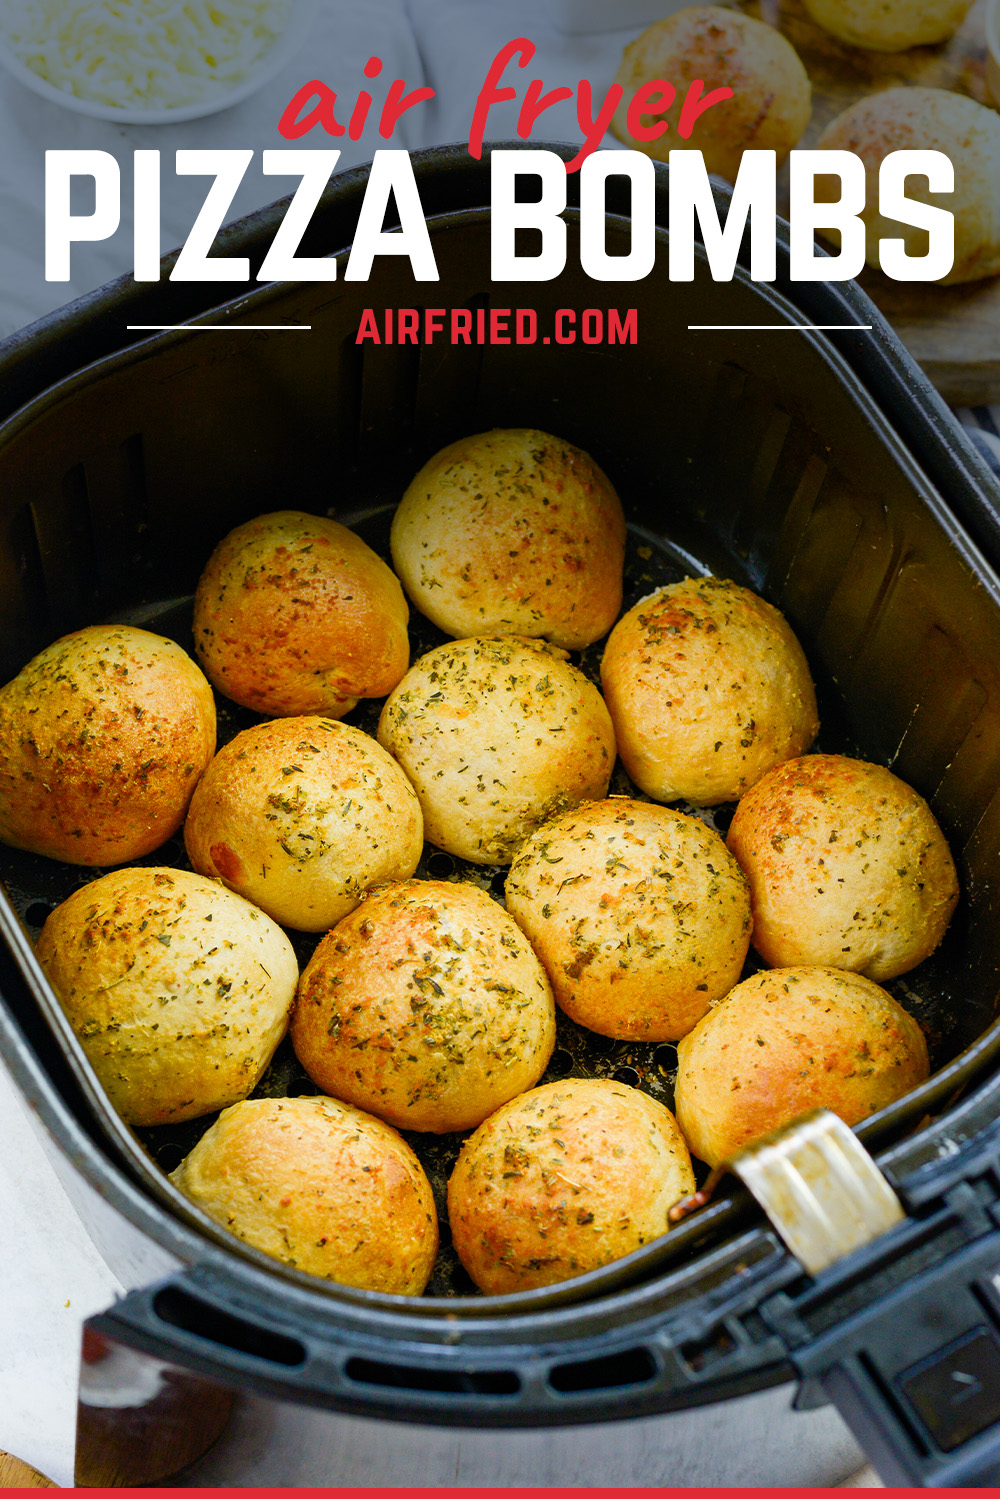 Try out these air fryer pizza bombs for a soft, fluffy alternative to a pizza roll!